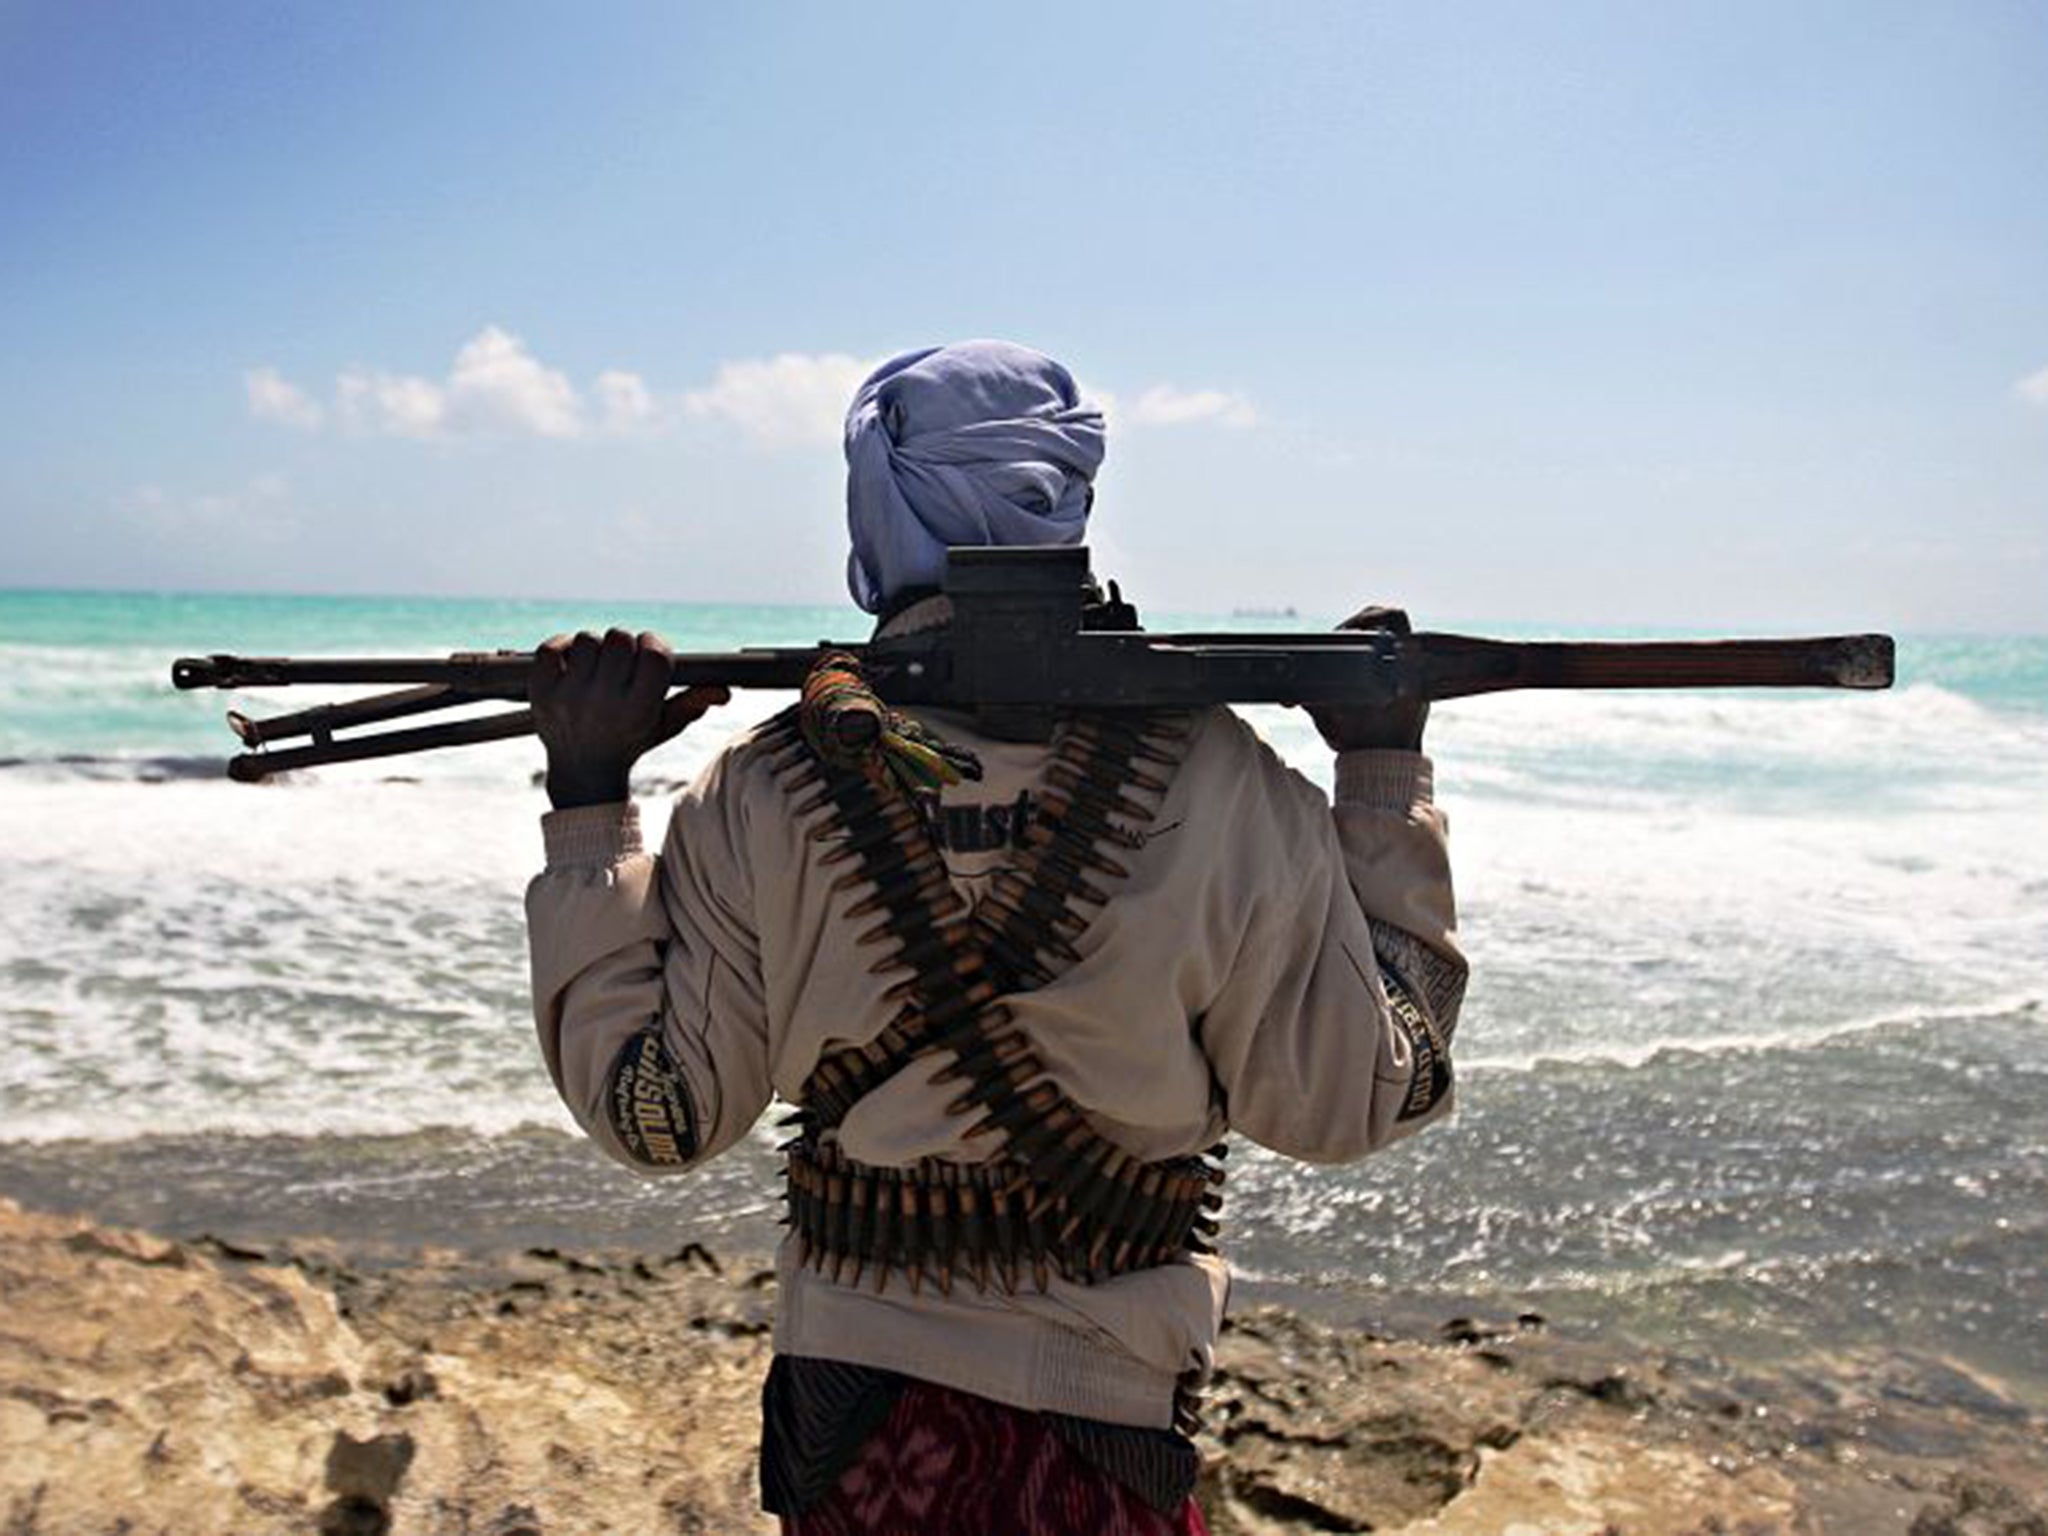 The cost of piracy in the western Indian Ocean alone was about £1.5bn